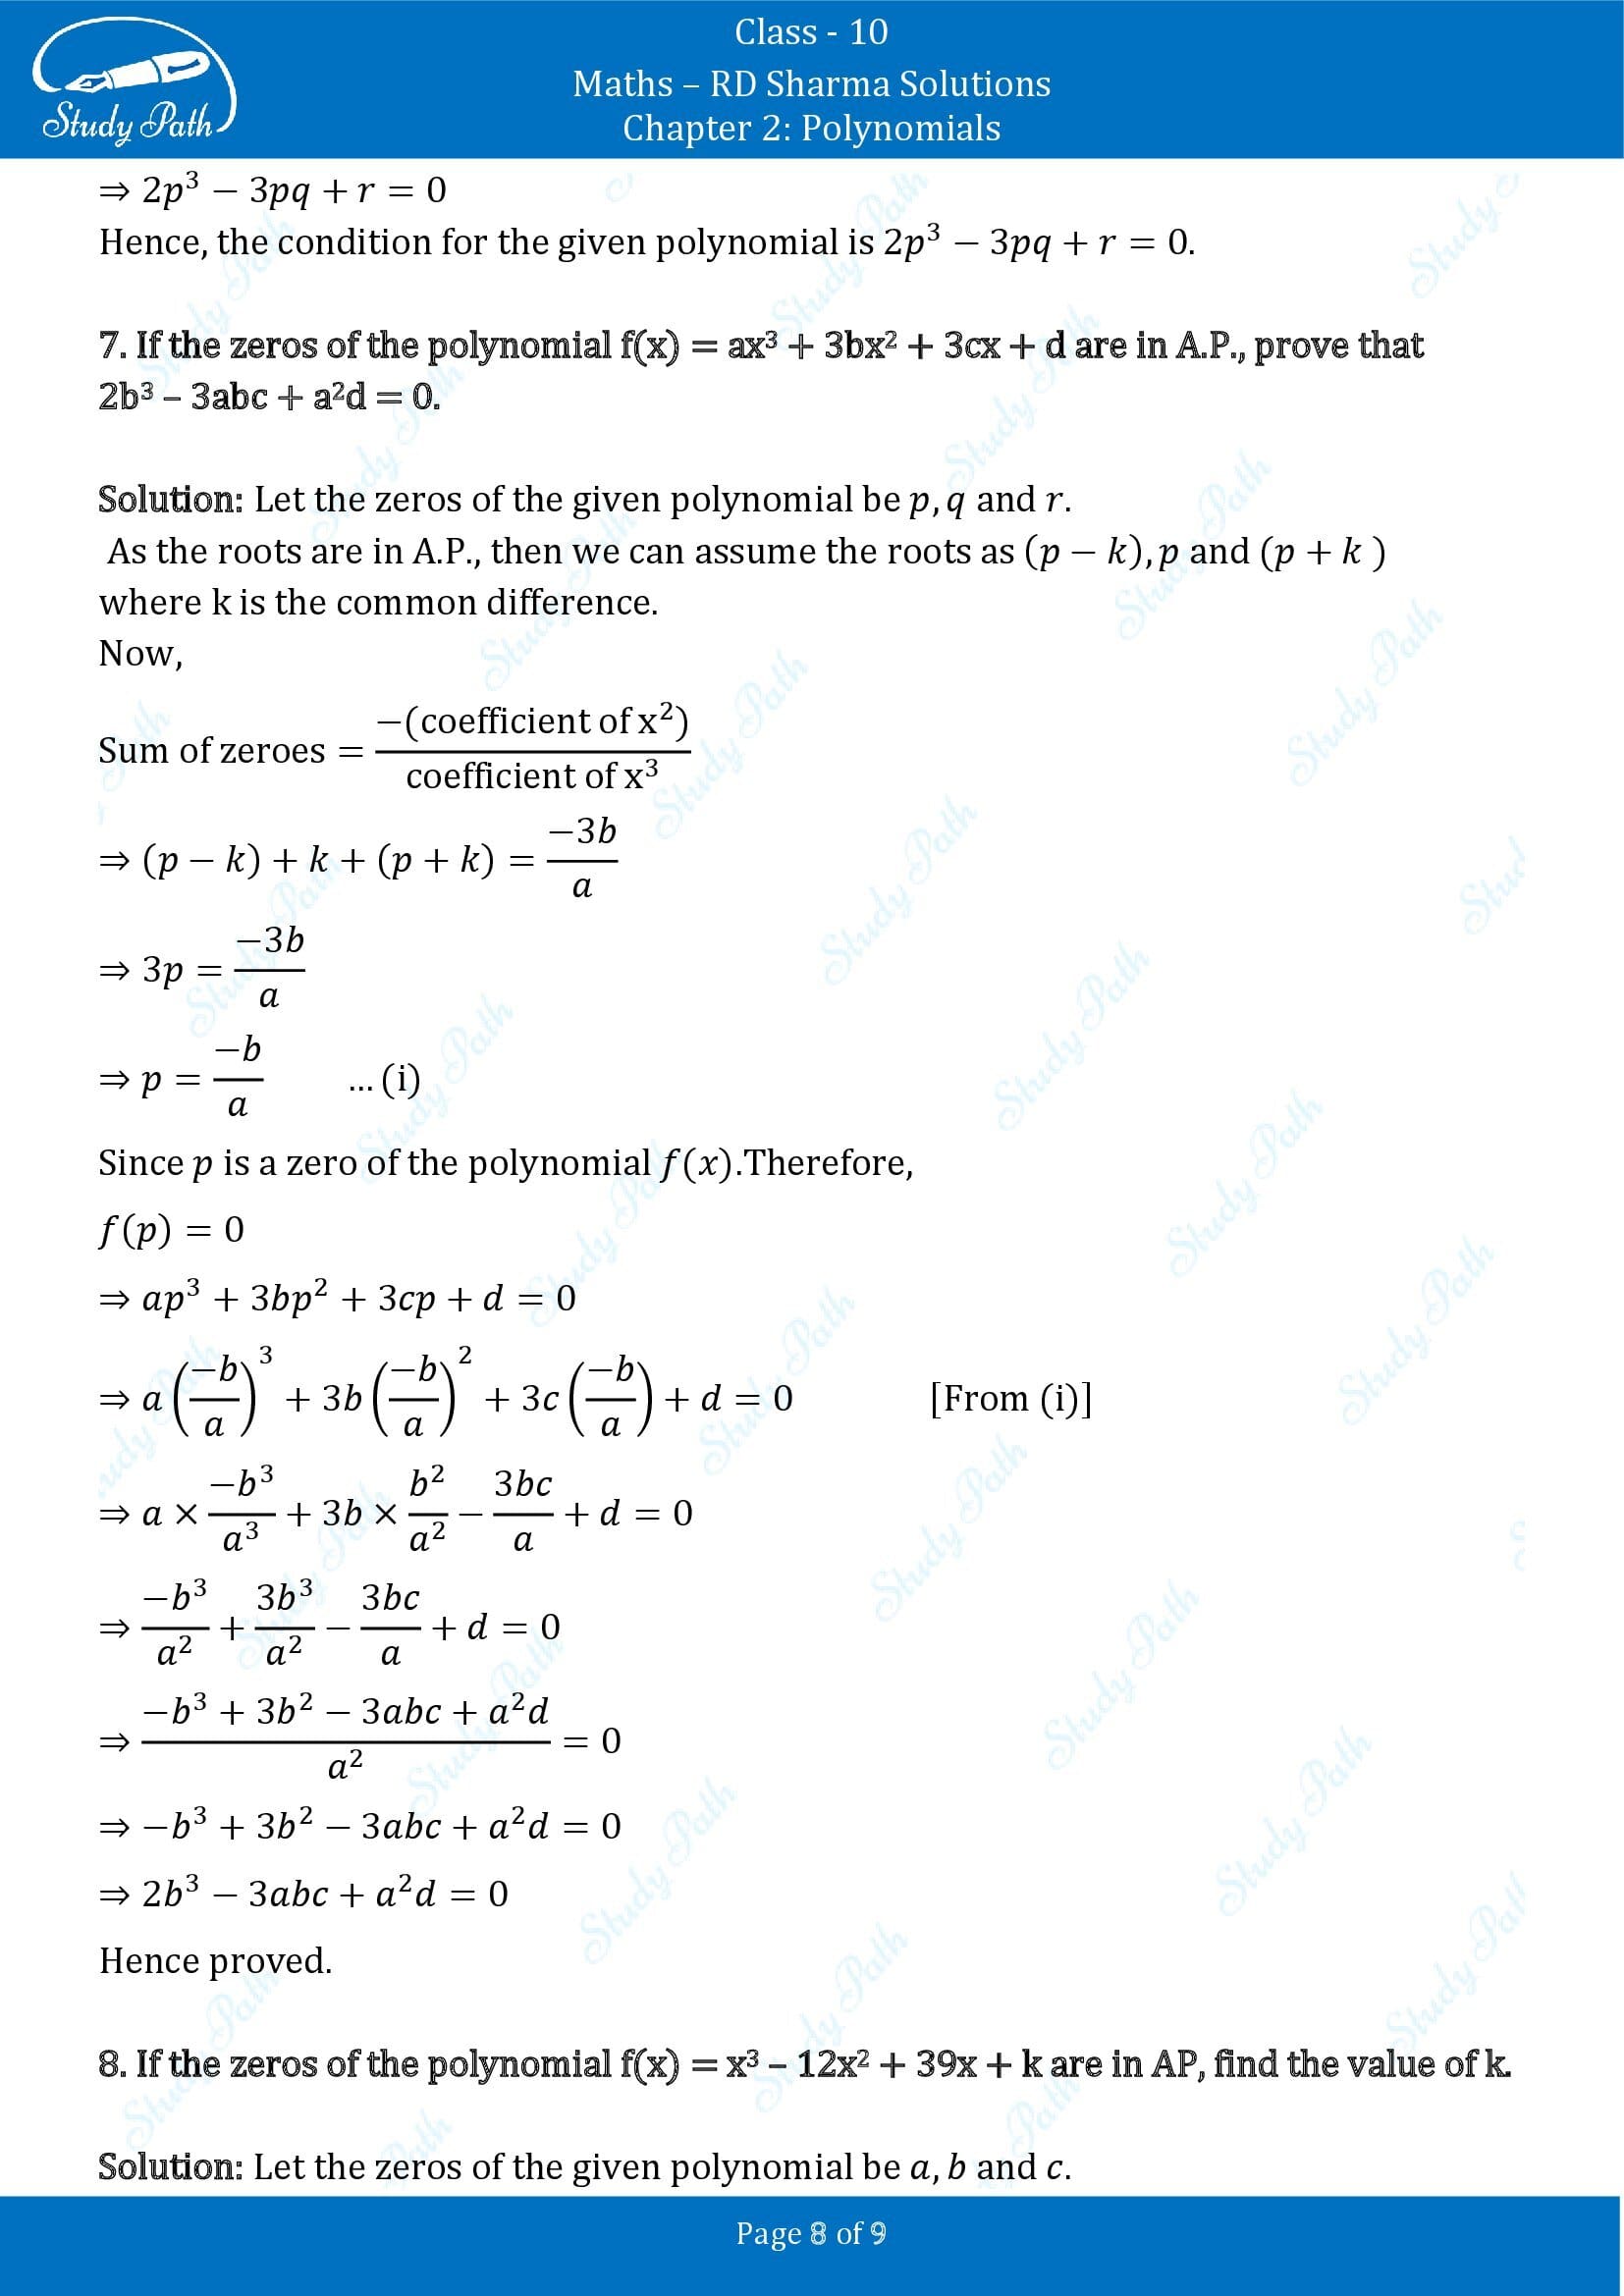 RD Sharma Solutions Class 10 Chapter 2 Polynomials Exercise 2.2 00008